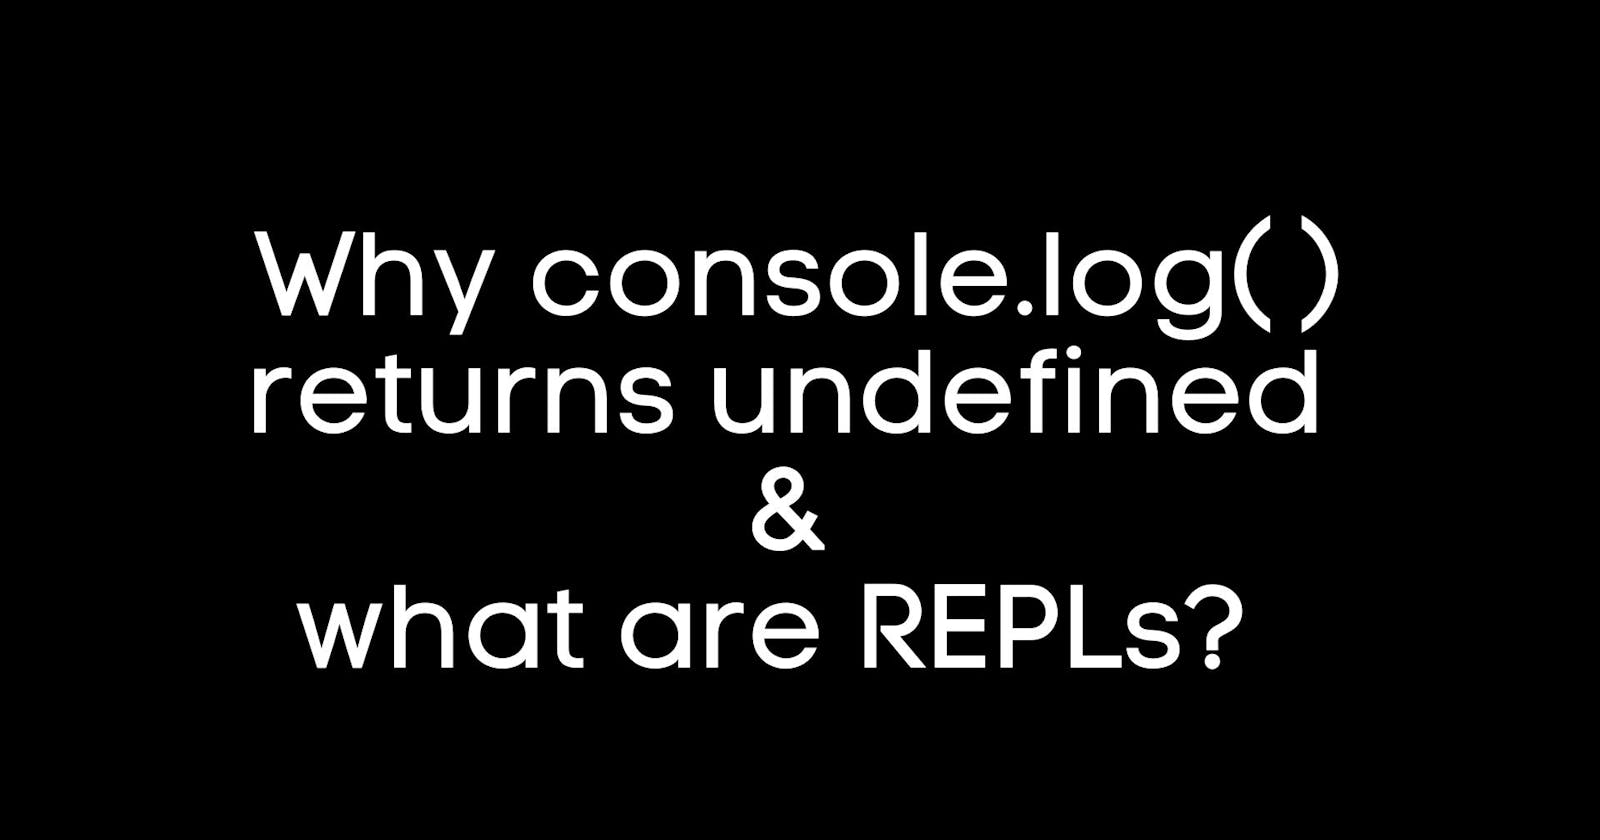 Why does console.log() return ‘undefined’?